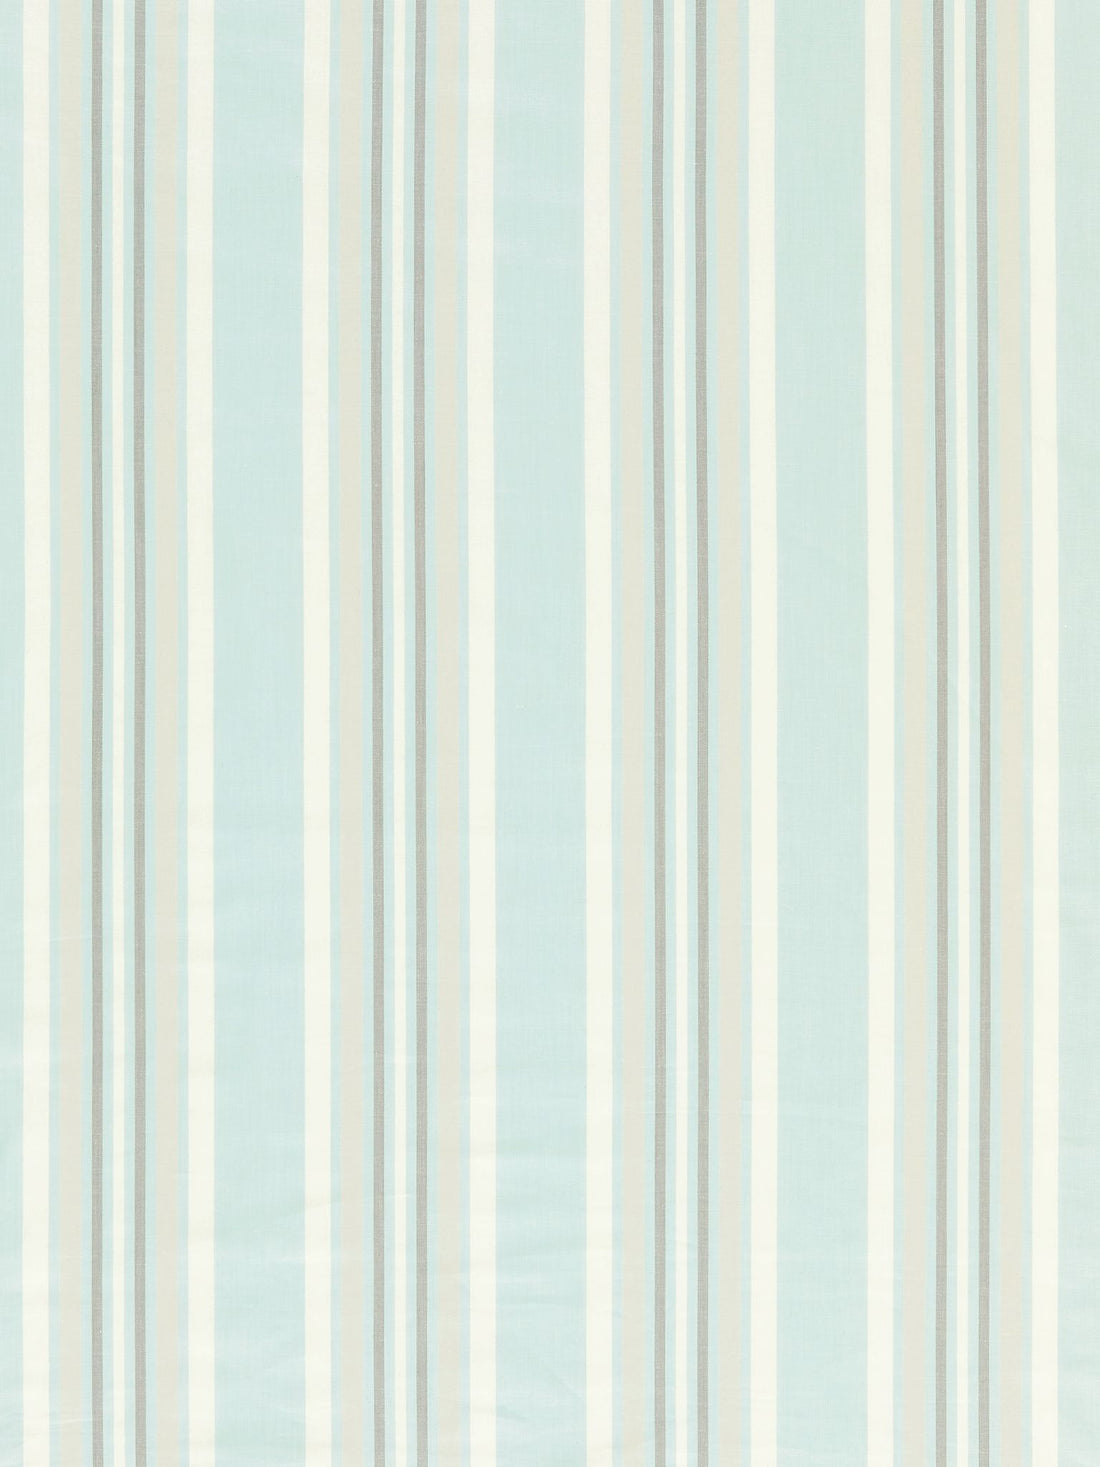 Strada Stripe fabric in mineral color - pattern number SC 000227220 - by Scalamandre in the Scalamandre Fabrics Book 1 collection